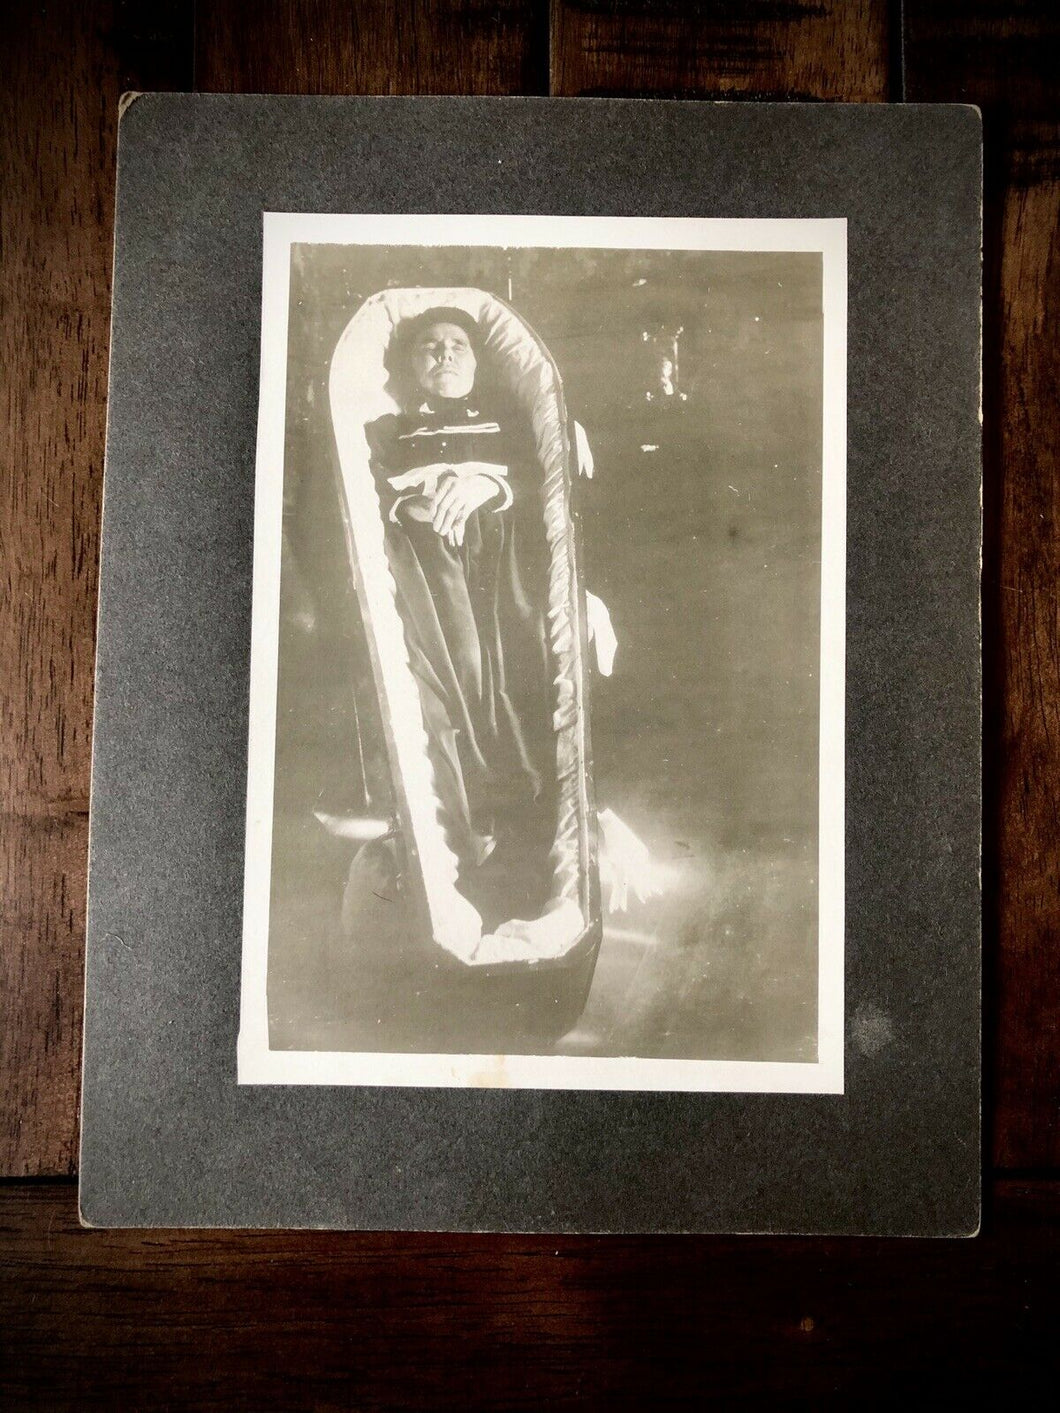 Post Mortem Woman In Coffin 10” X 8” Old Photo Probably Wisconsin 1910s